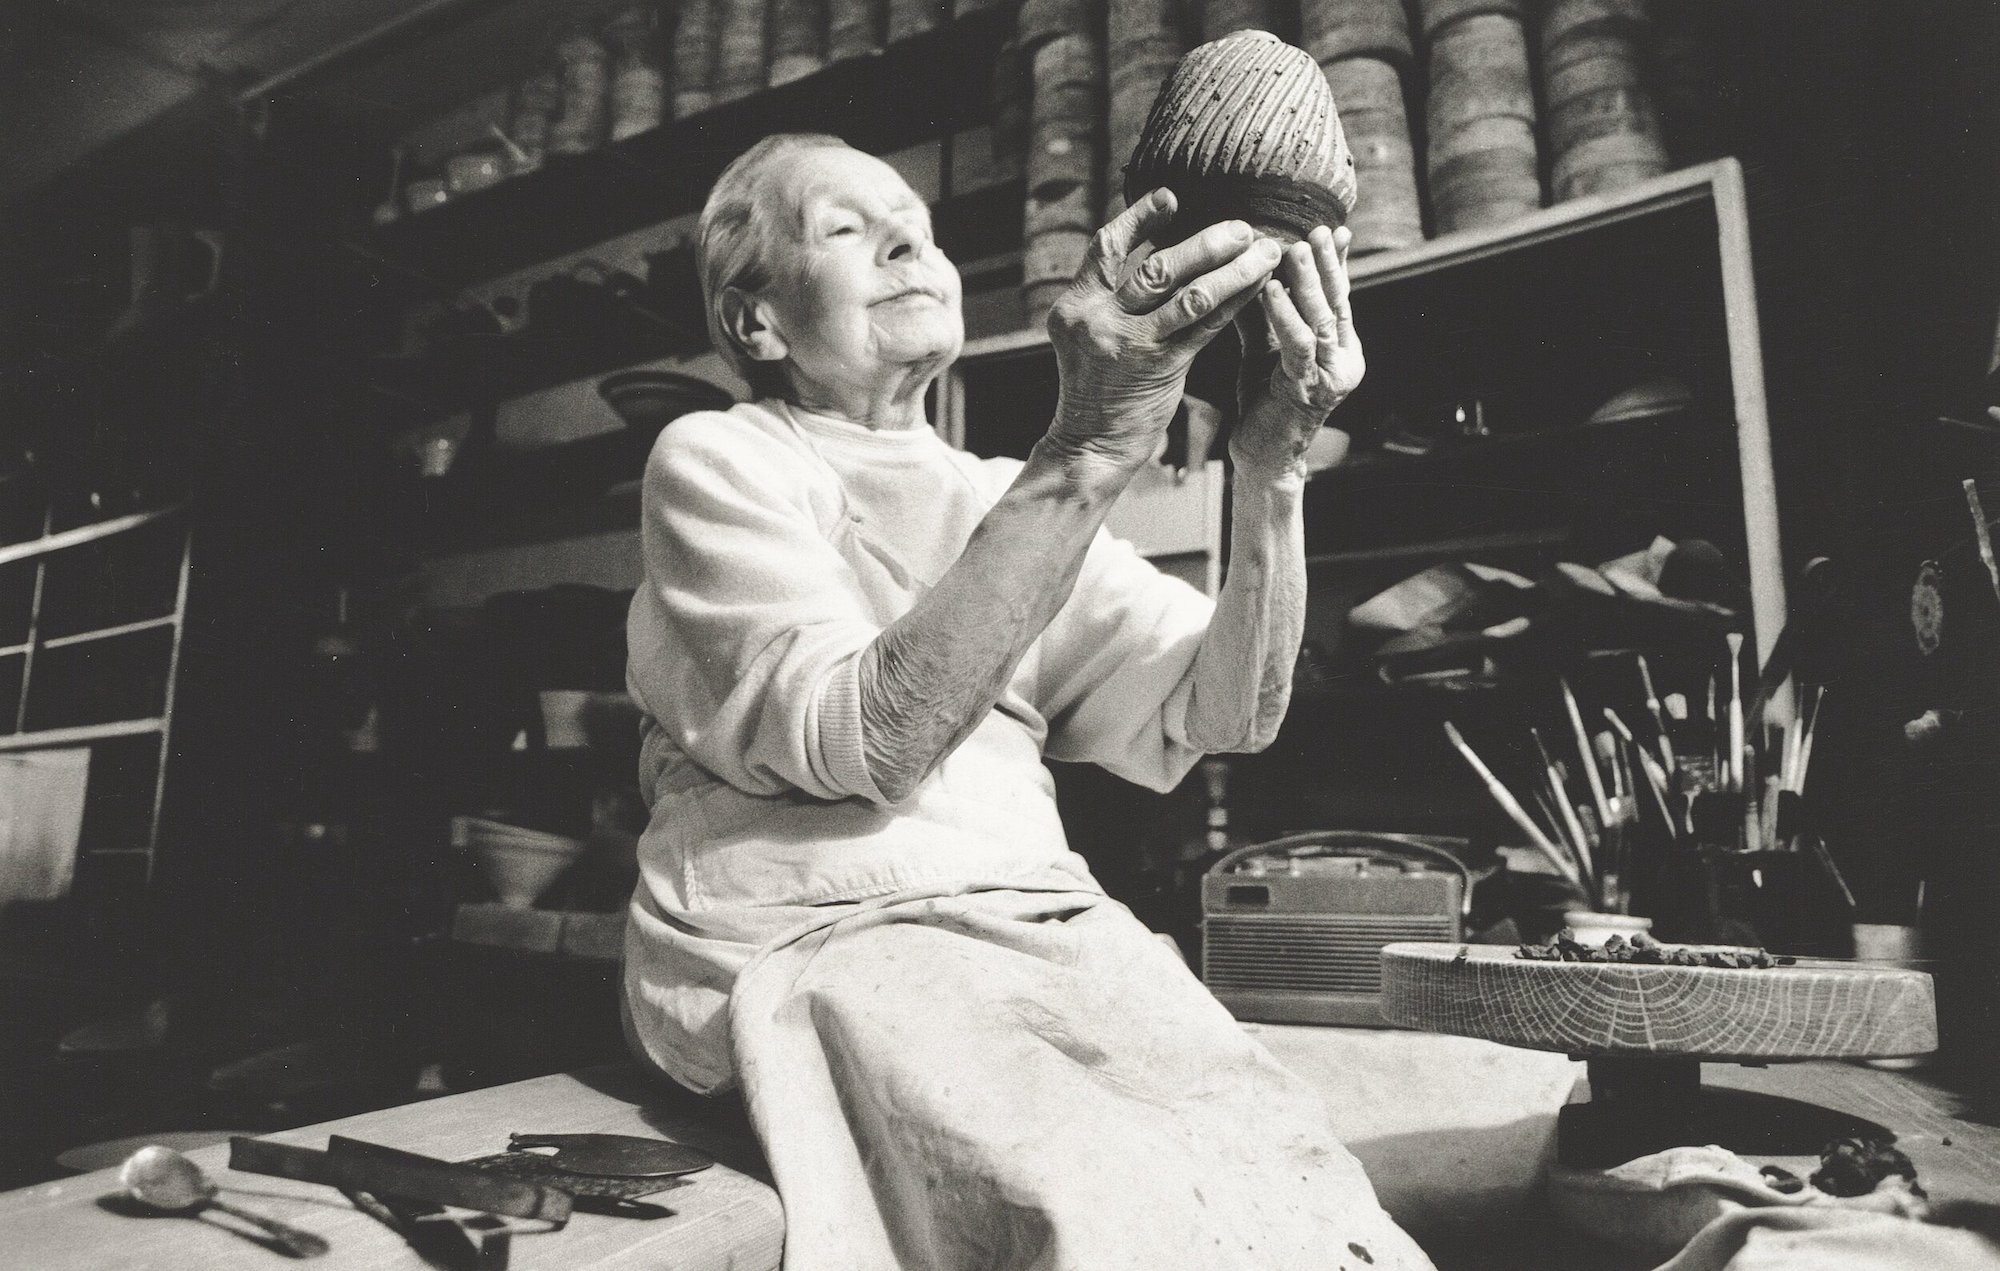 Lucy Rie, one of the UK's most influential ceramicists